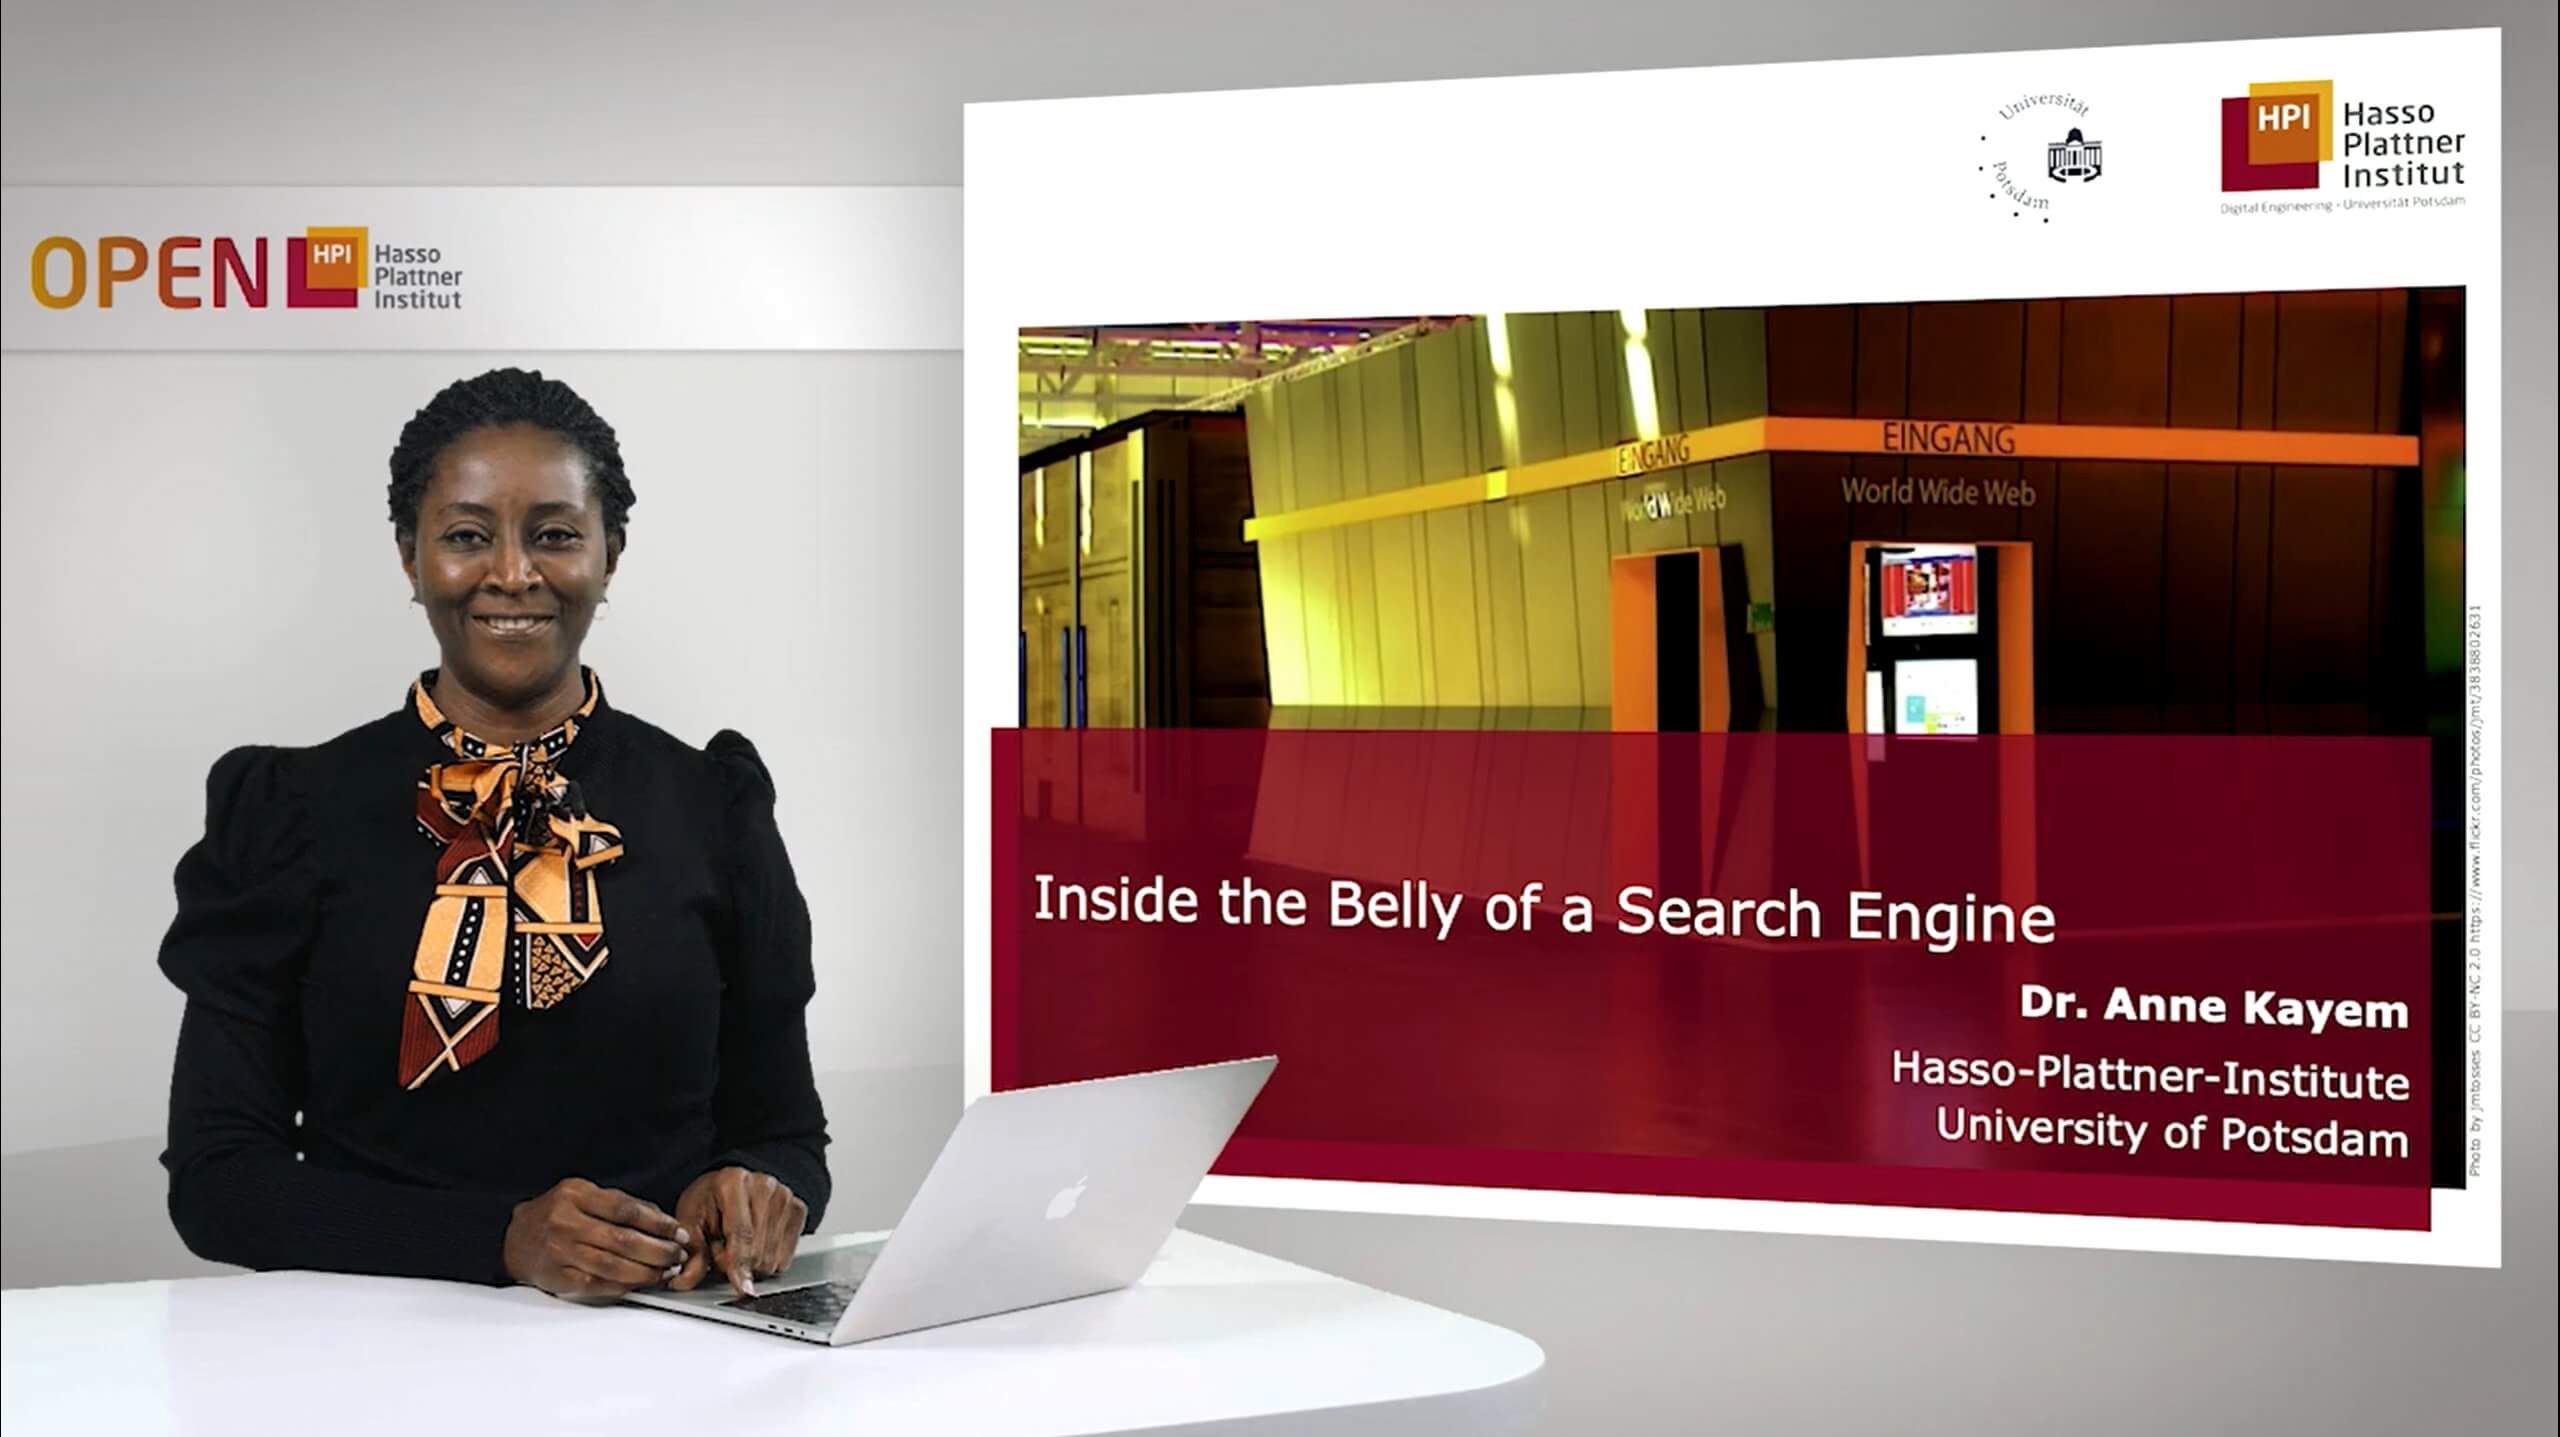 Dr. Anne Kayem - Inside the Belly of a Search Engine